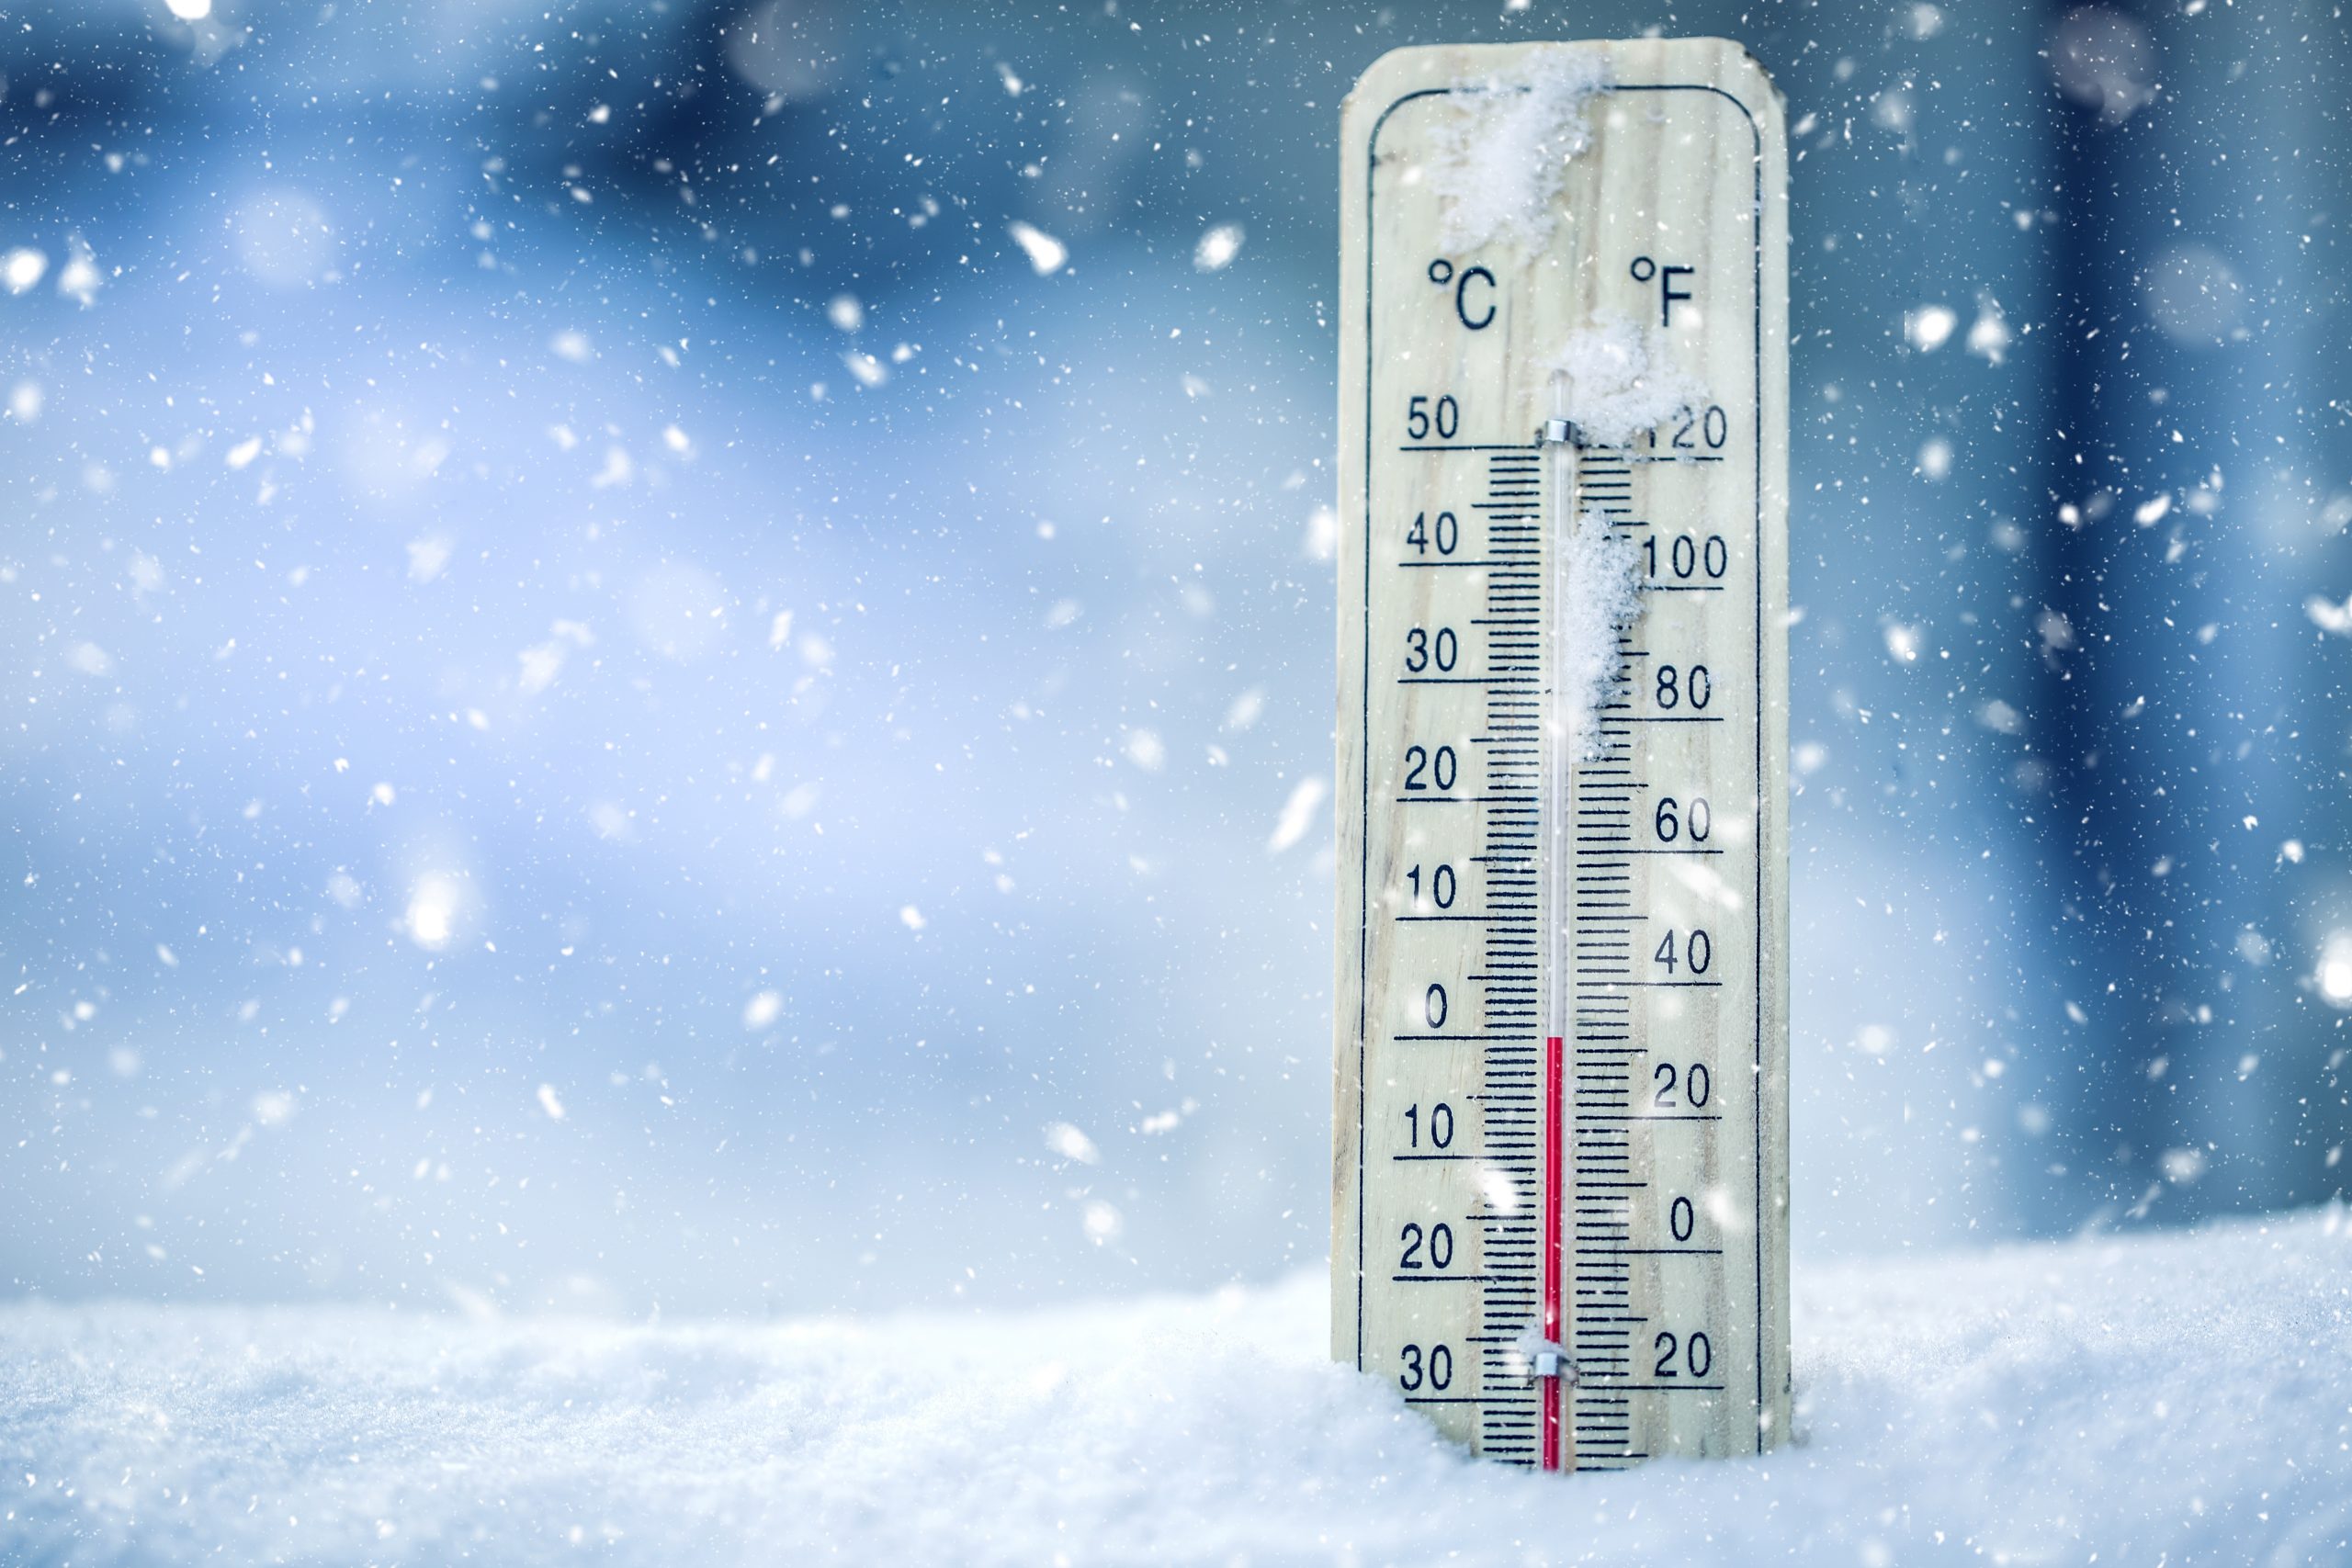 thermometer-on-snow-shows-low-temperatures-zero-low-temperatures-in-degrees-celsius-and-fahrenheit-cold-winter-weather-zero-celsius-thirty-two-farenheit